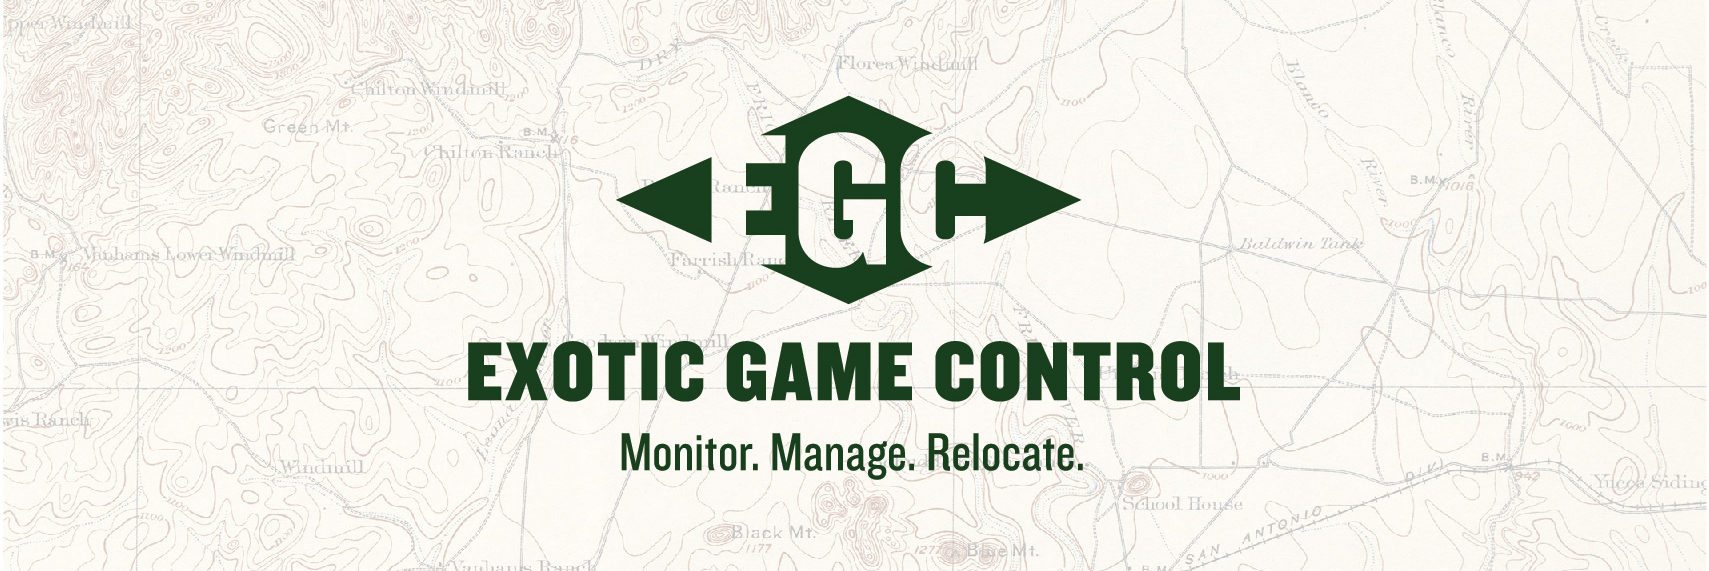 Exotic Game Control